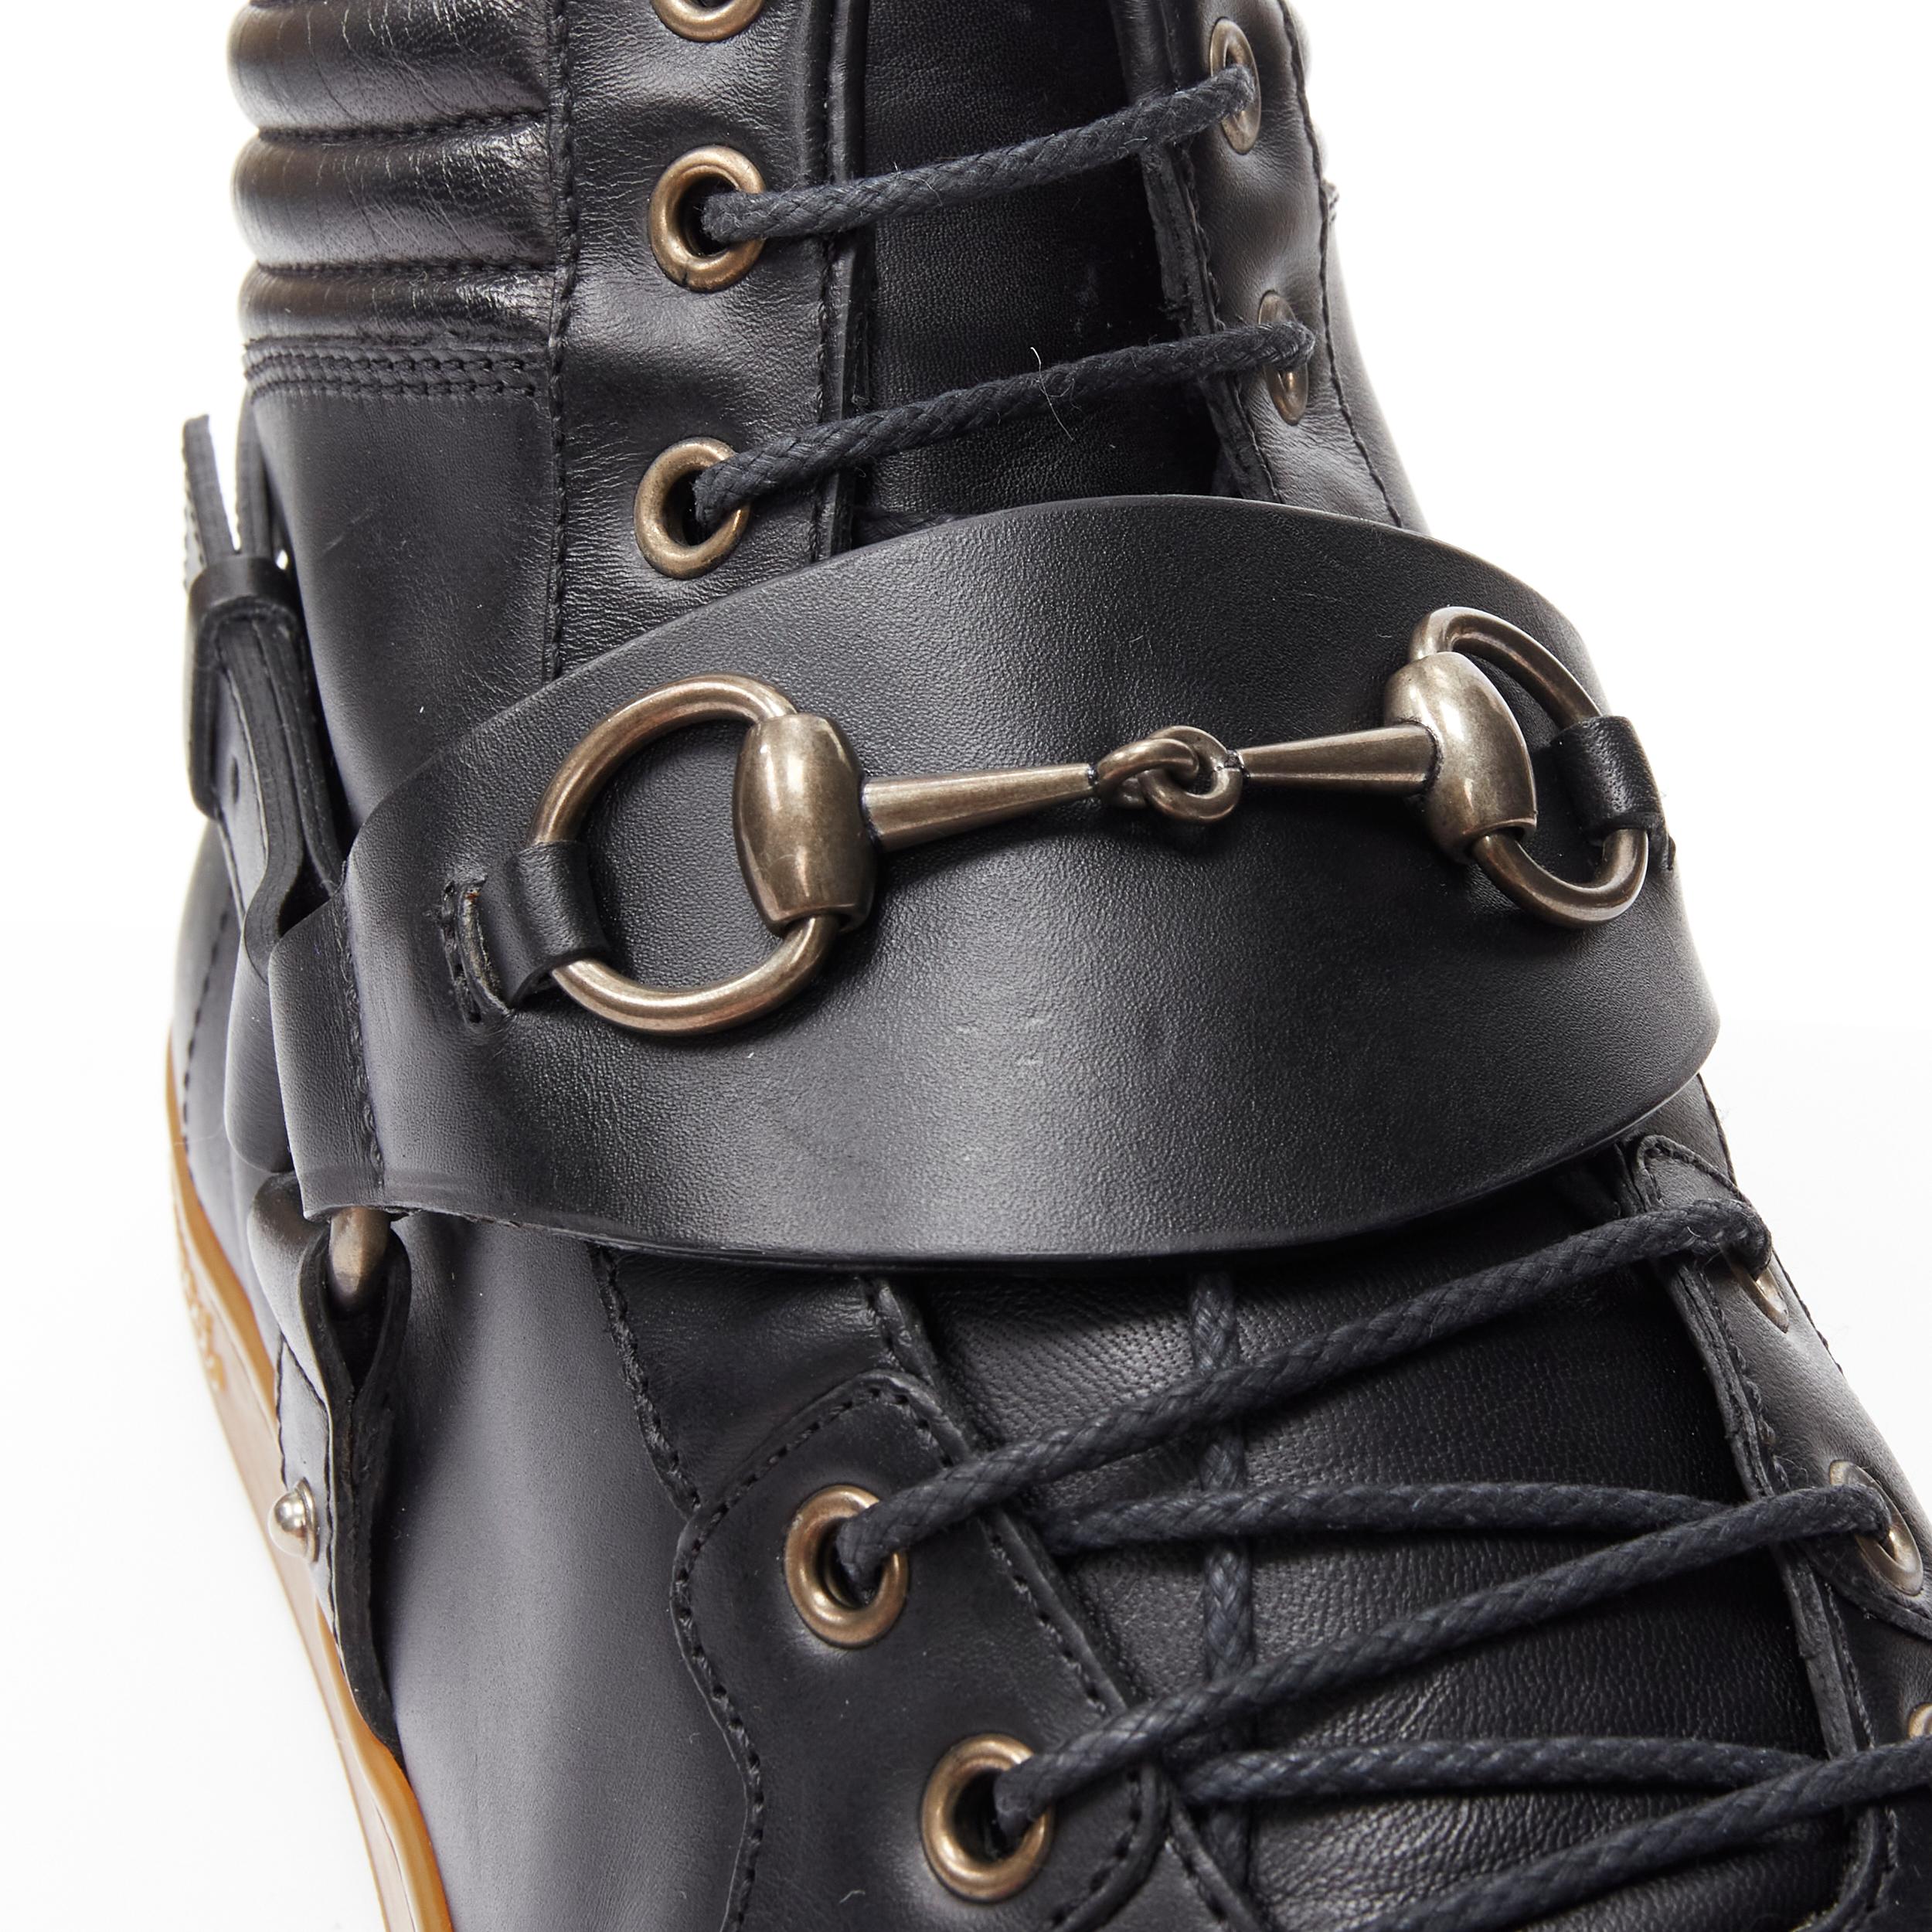 rare GUCCI Horsebit harness black leather gum sole high top sneaker UK8 EU42 Reference: TGAS/B01961 Brand: Gucci Material: Leather Color: Black Pattern: Solid Closure: Lace Up Extra Detail: Horsebit harness detailing. Waxed laces. High top sneaker.